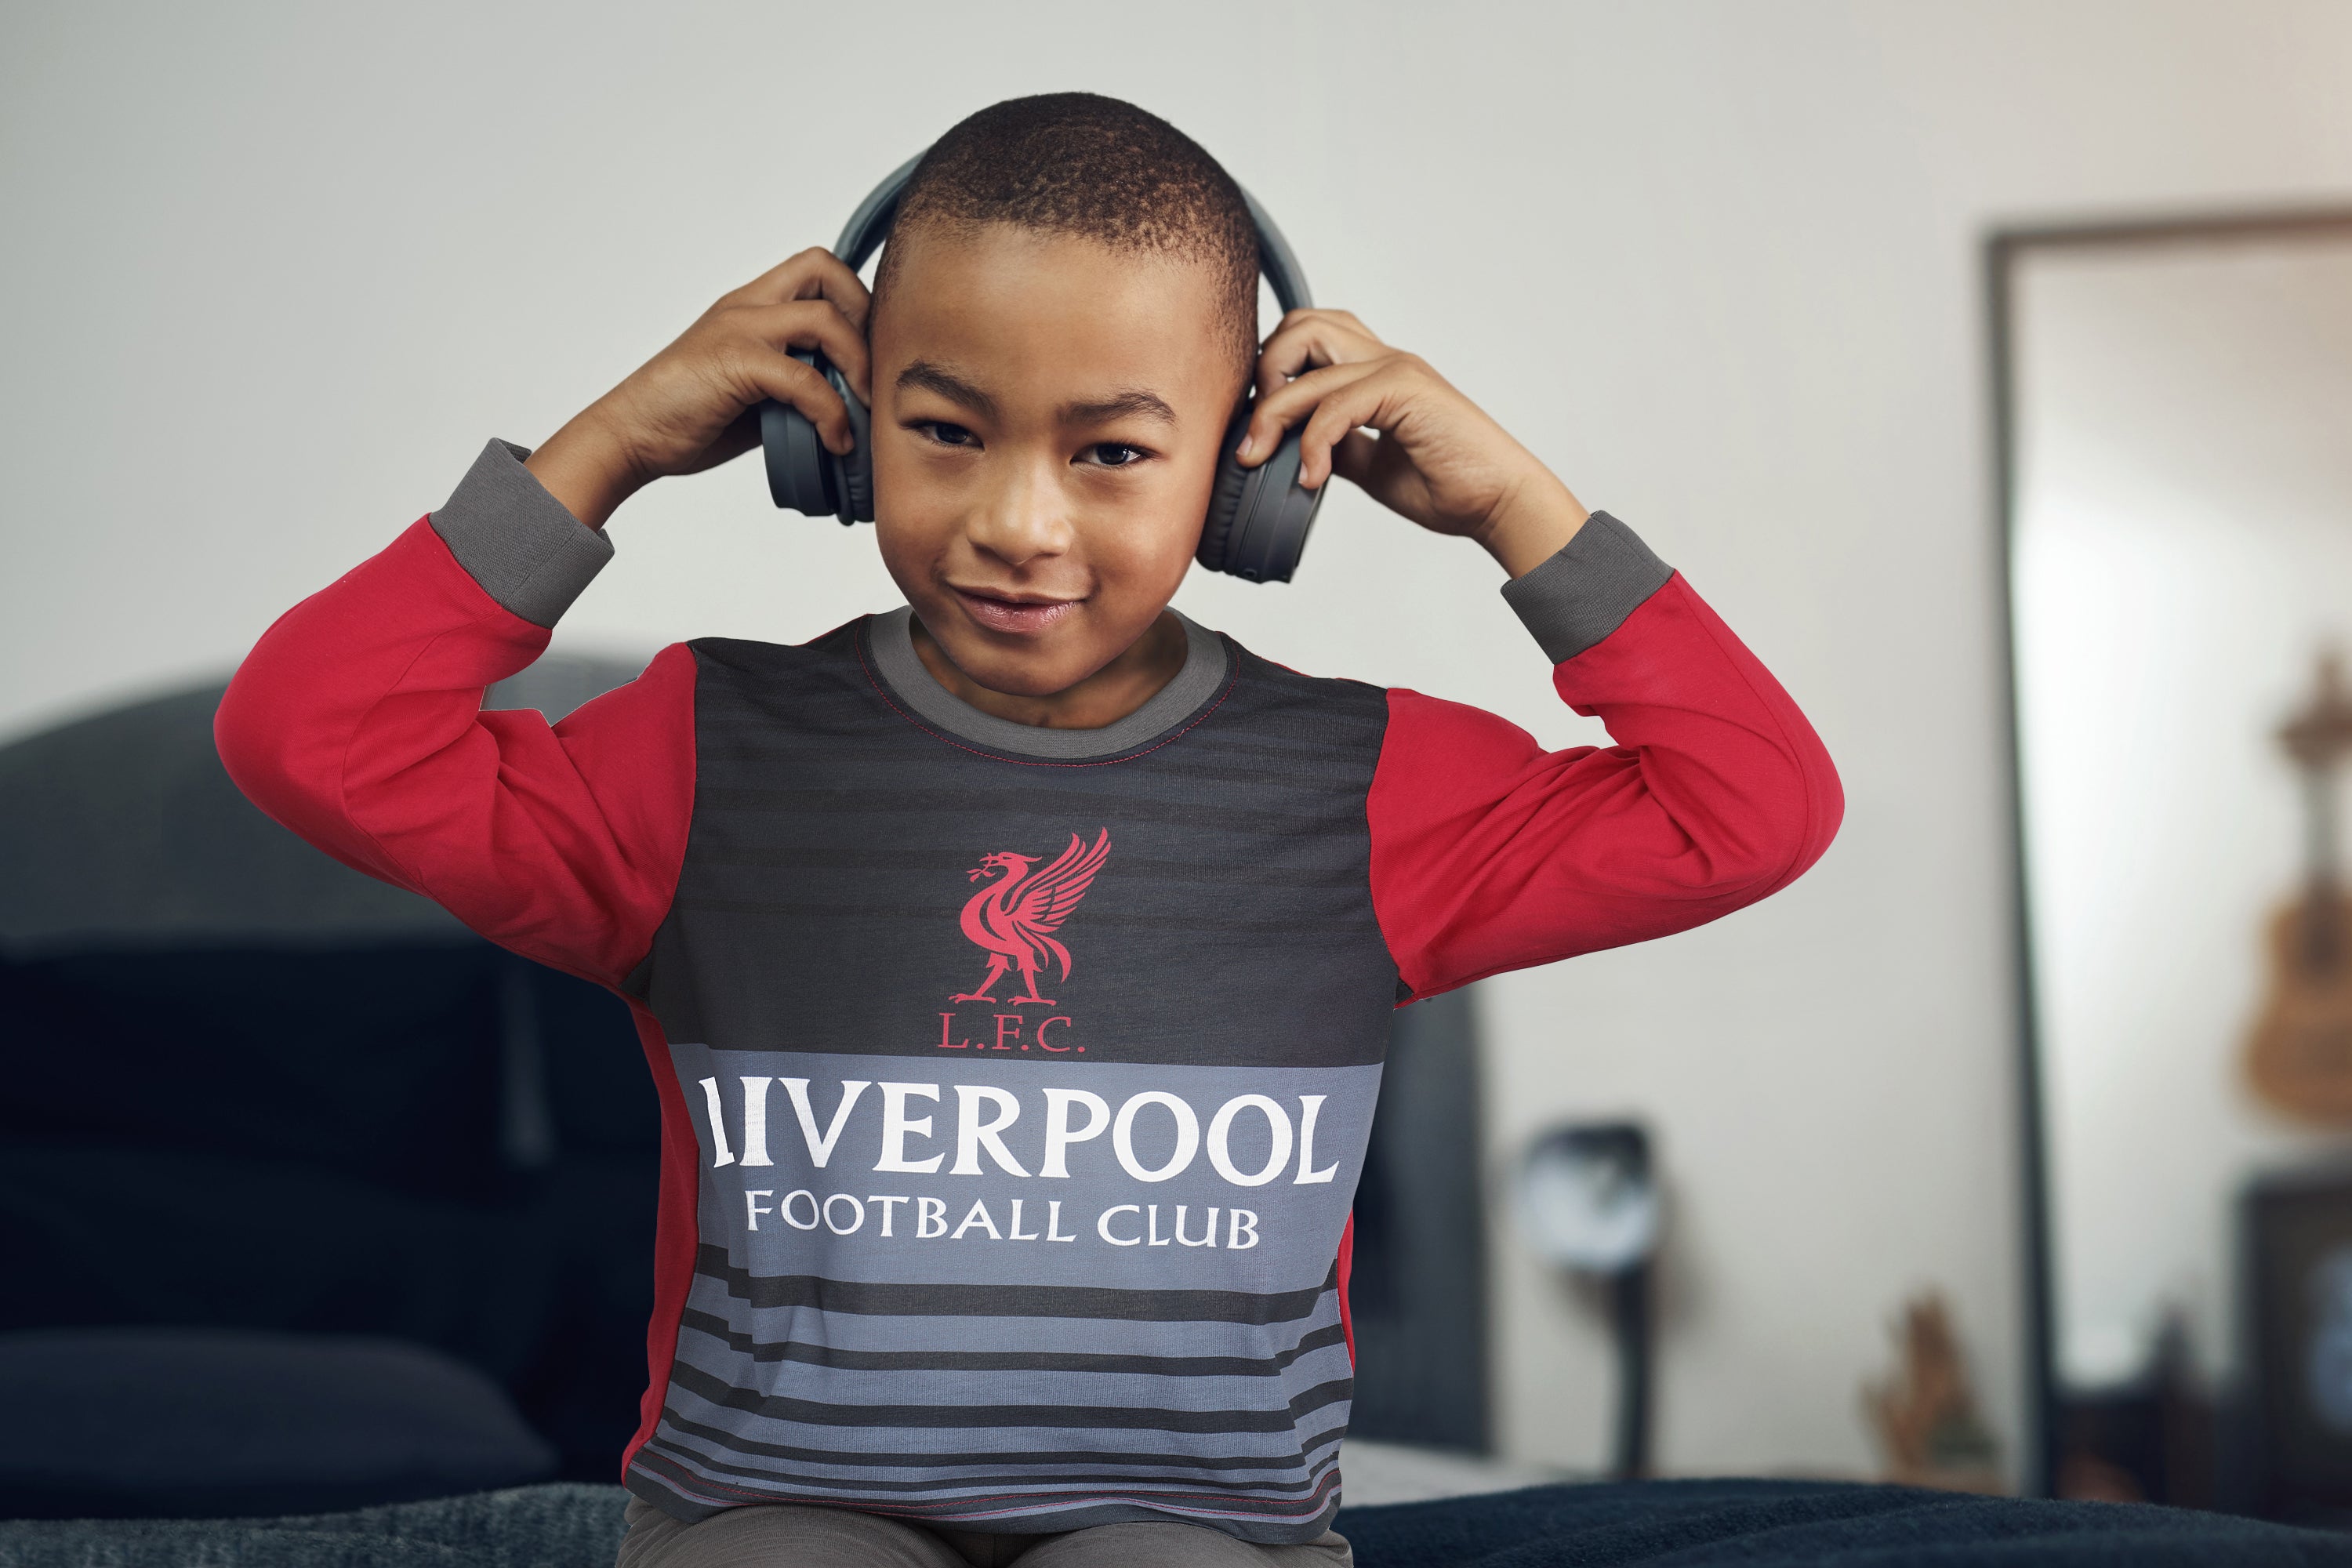 boy aged 7-8 wearing Liverpool FC Pyjamas and listening to music with headphones